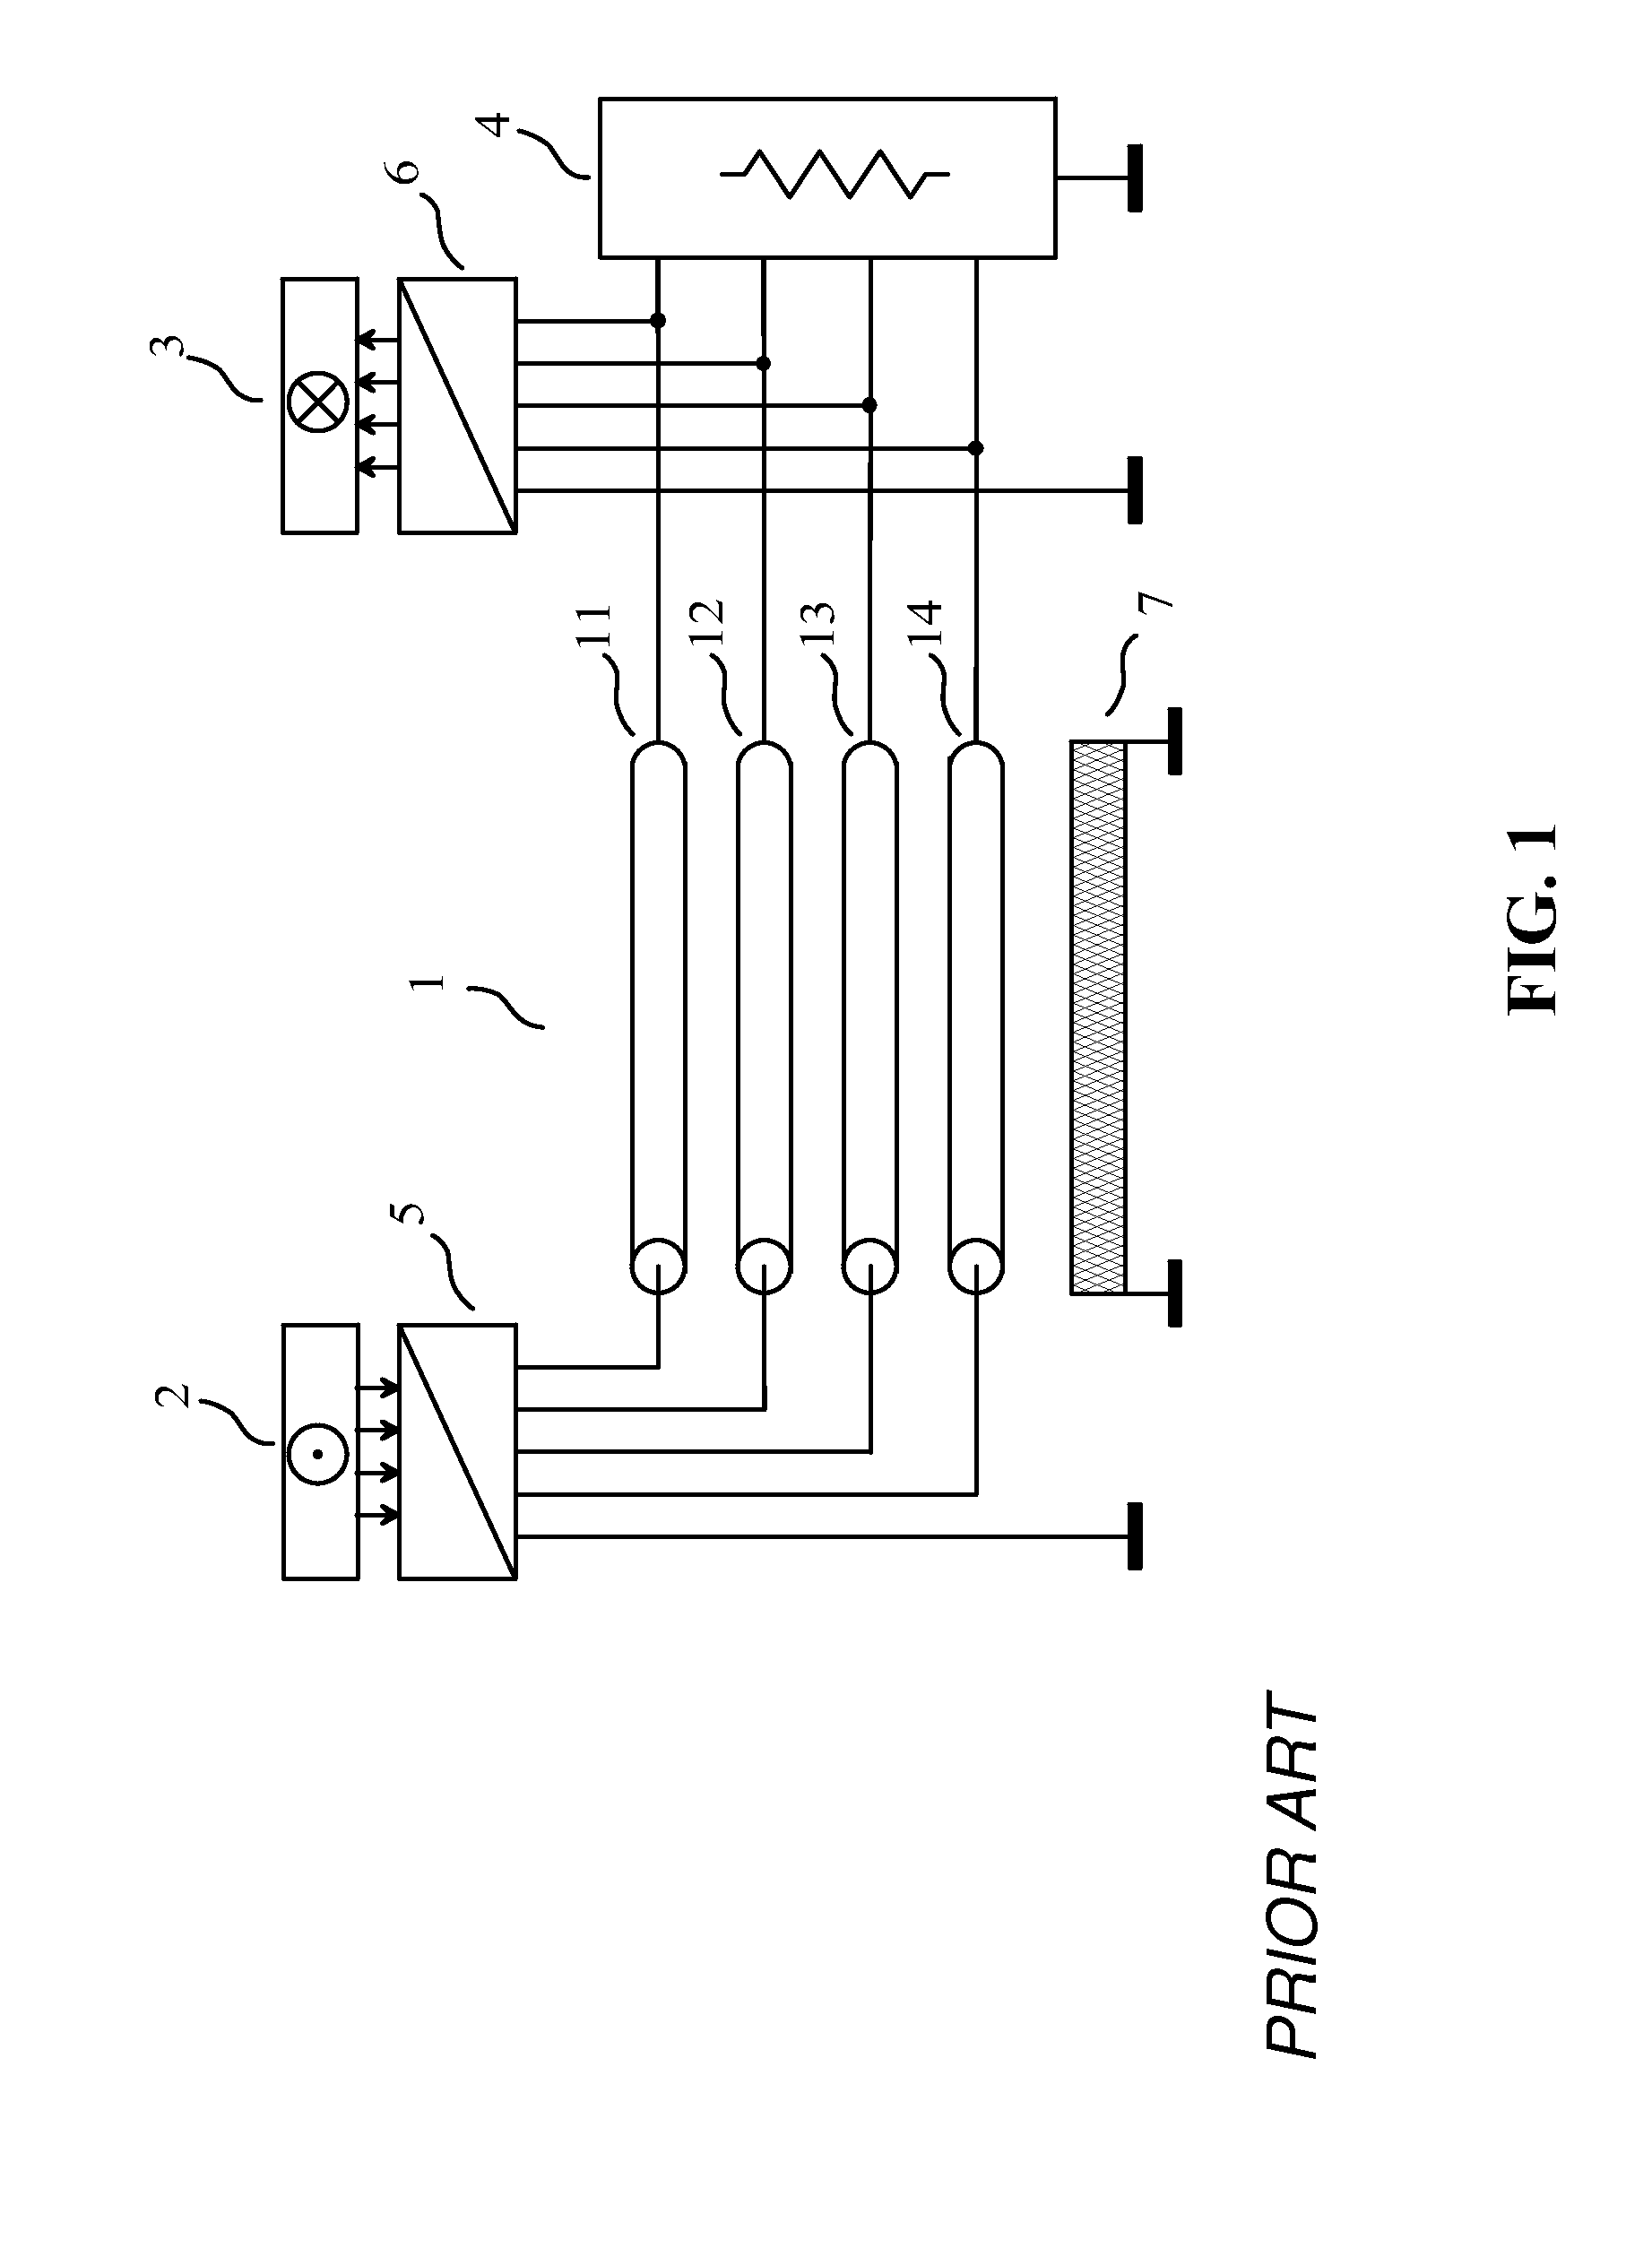 Method for transmission using a non-uniform interconnection